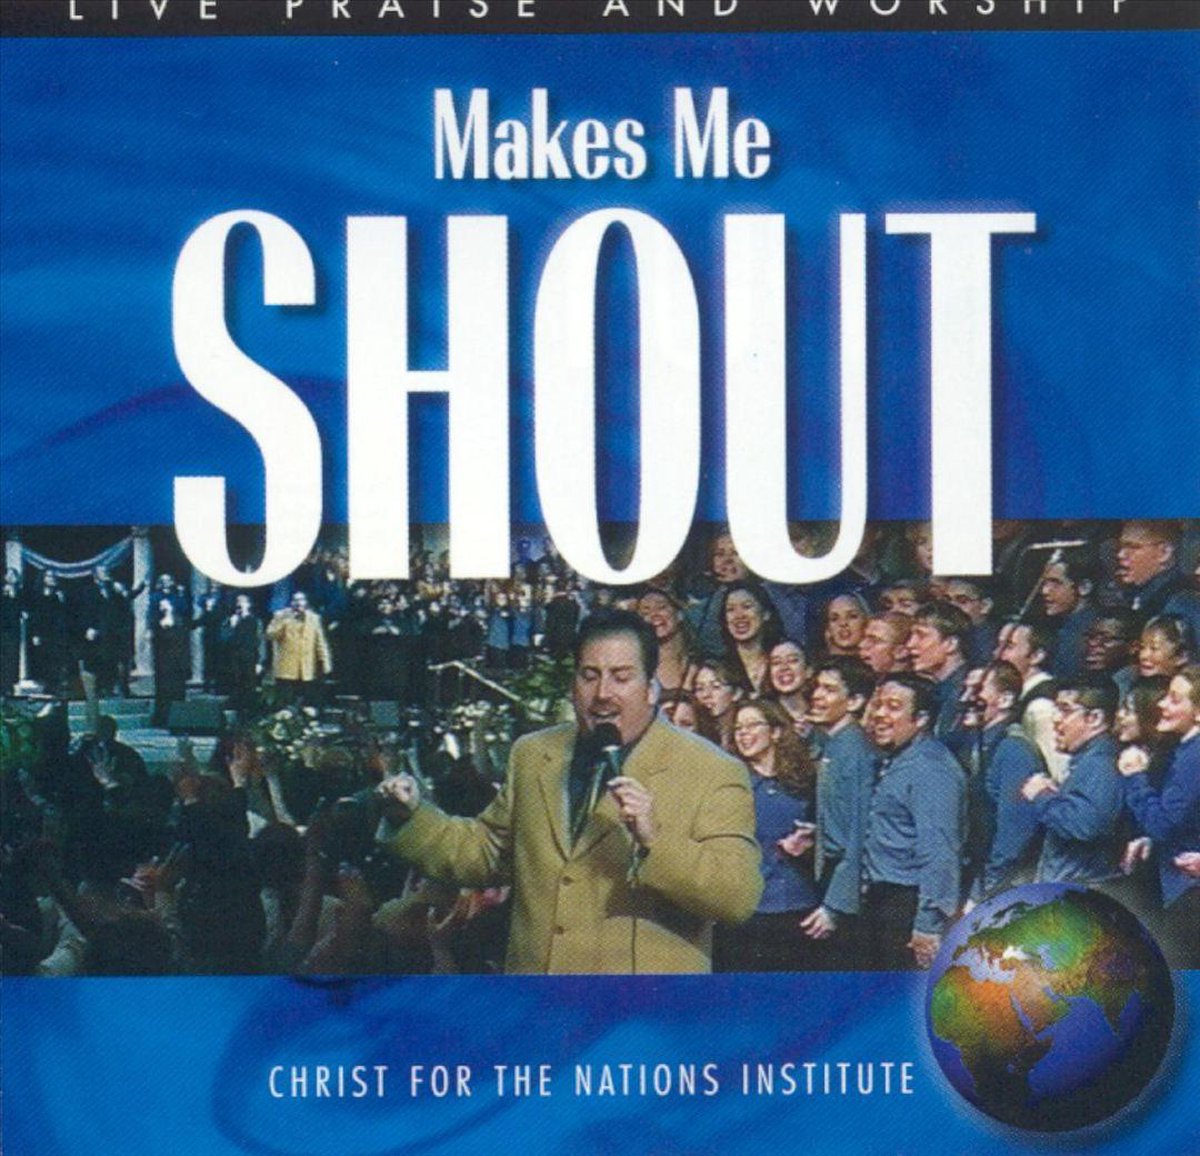 Live Praise and Worship from Christ for the Nation - various artists